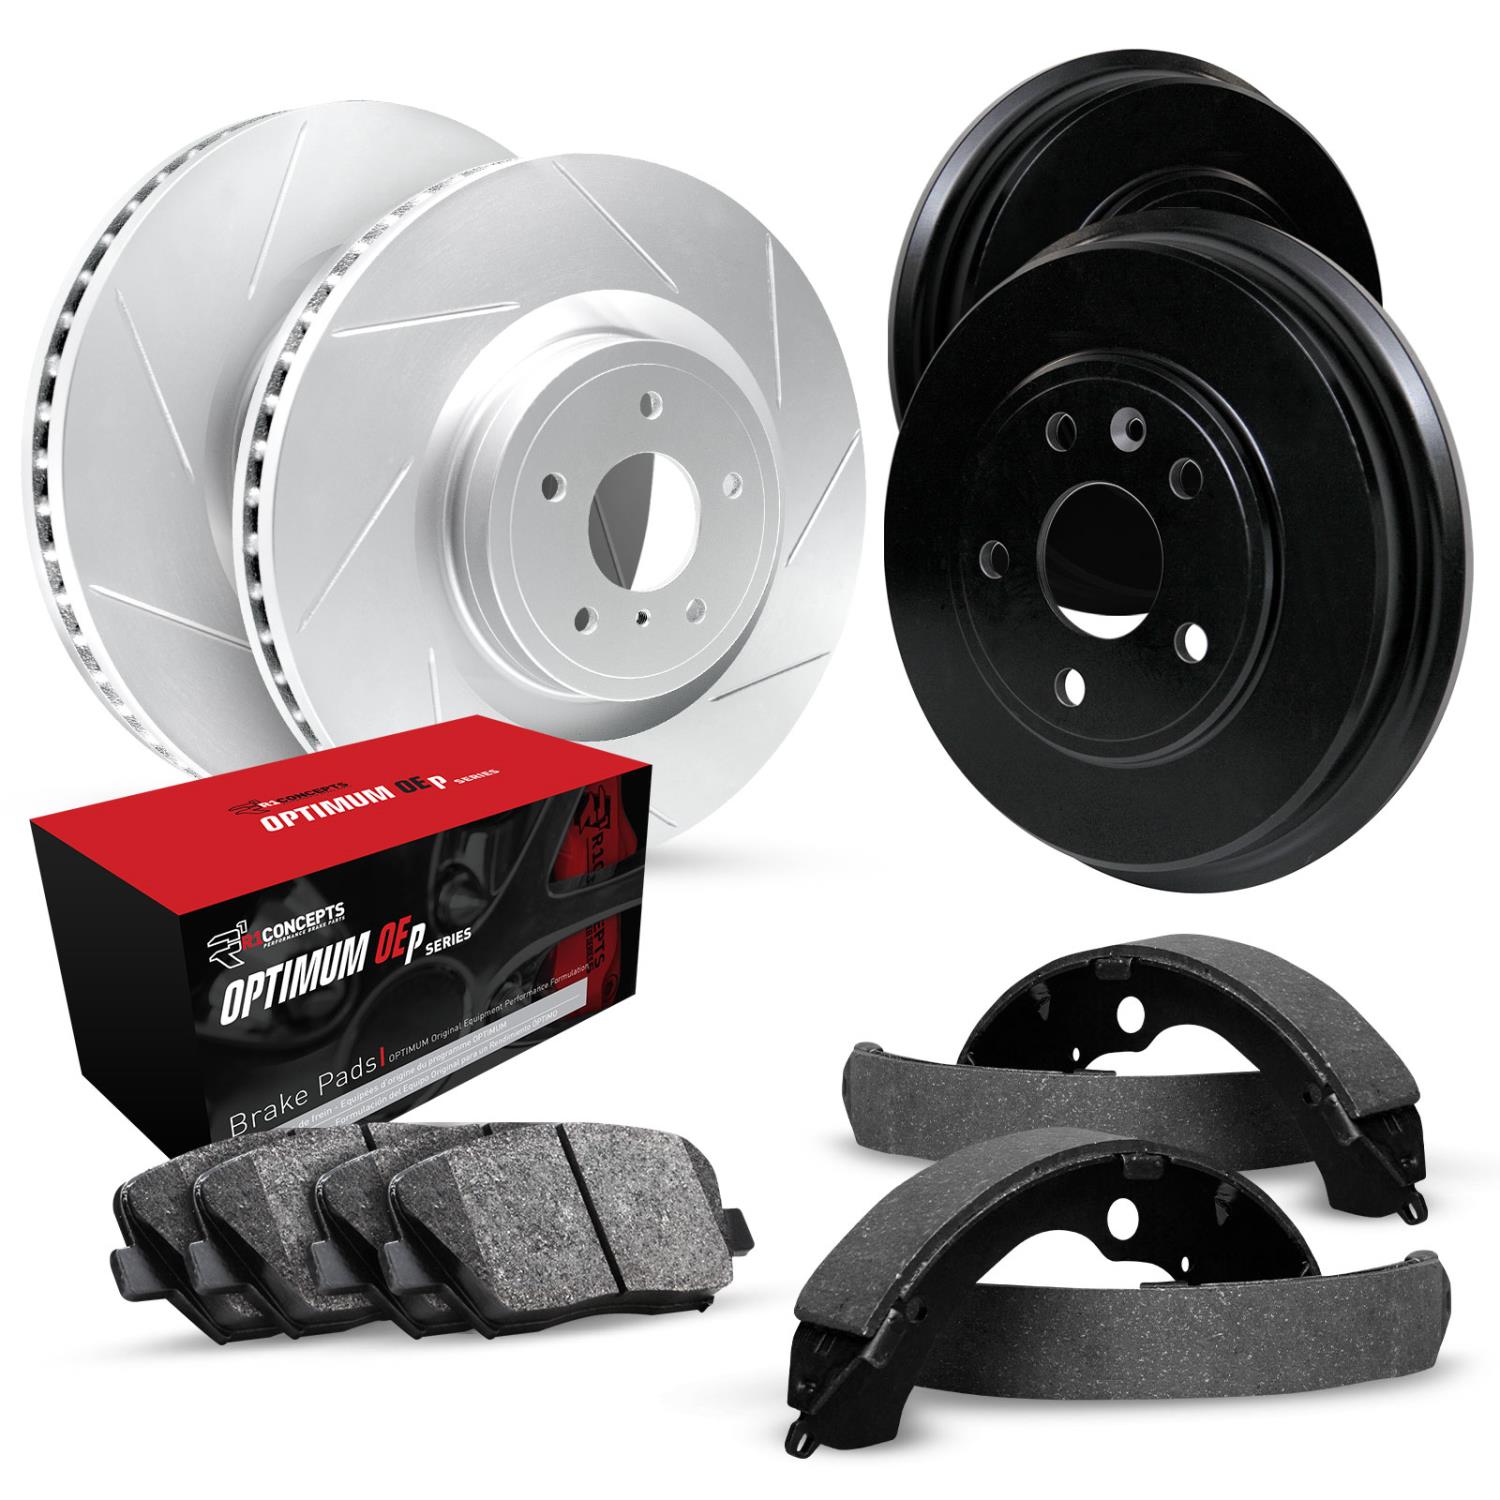 GEO-Carbon Slotted Brake Rotor & Drum Set w/Optimum OE Pads & Shoes, 1976-1989 GM, Position: Front & Rear